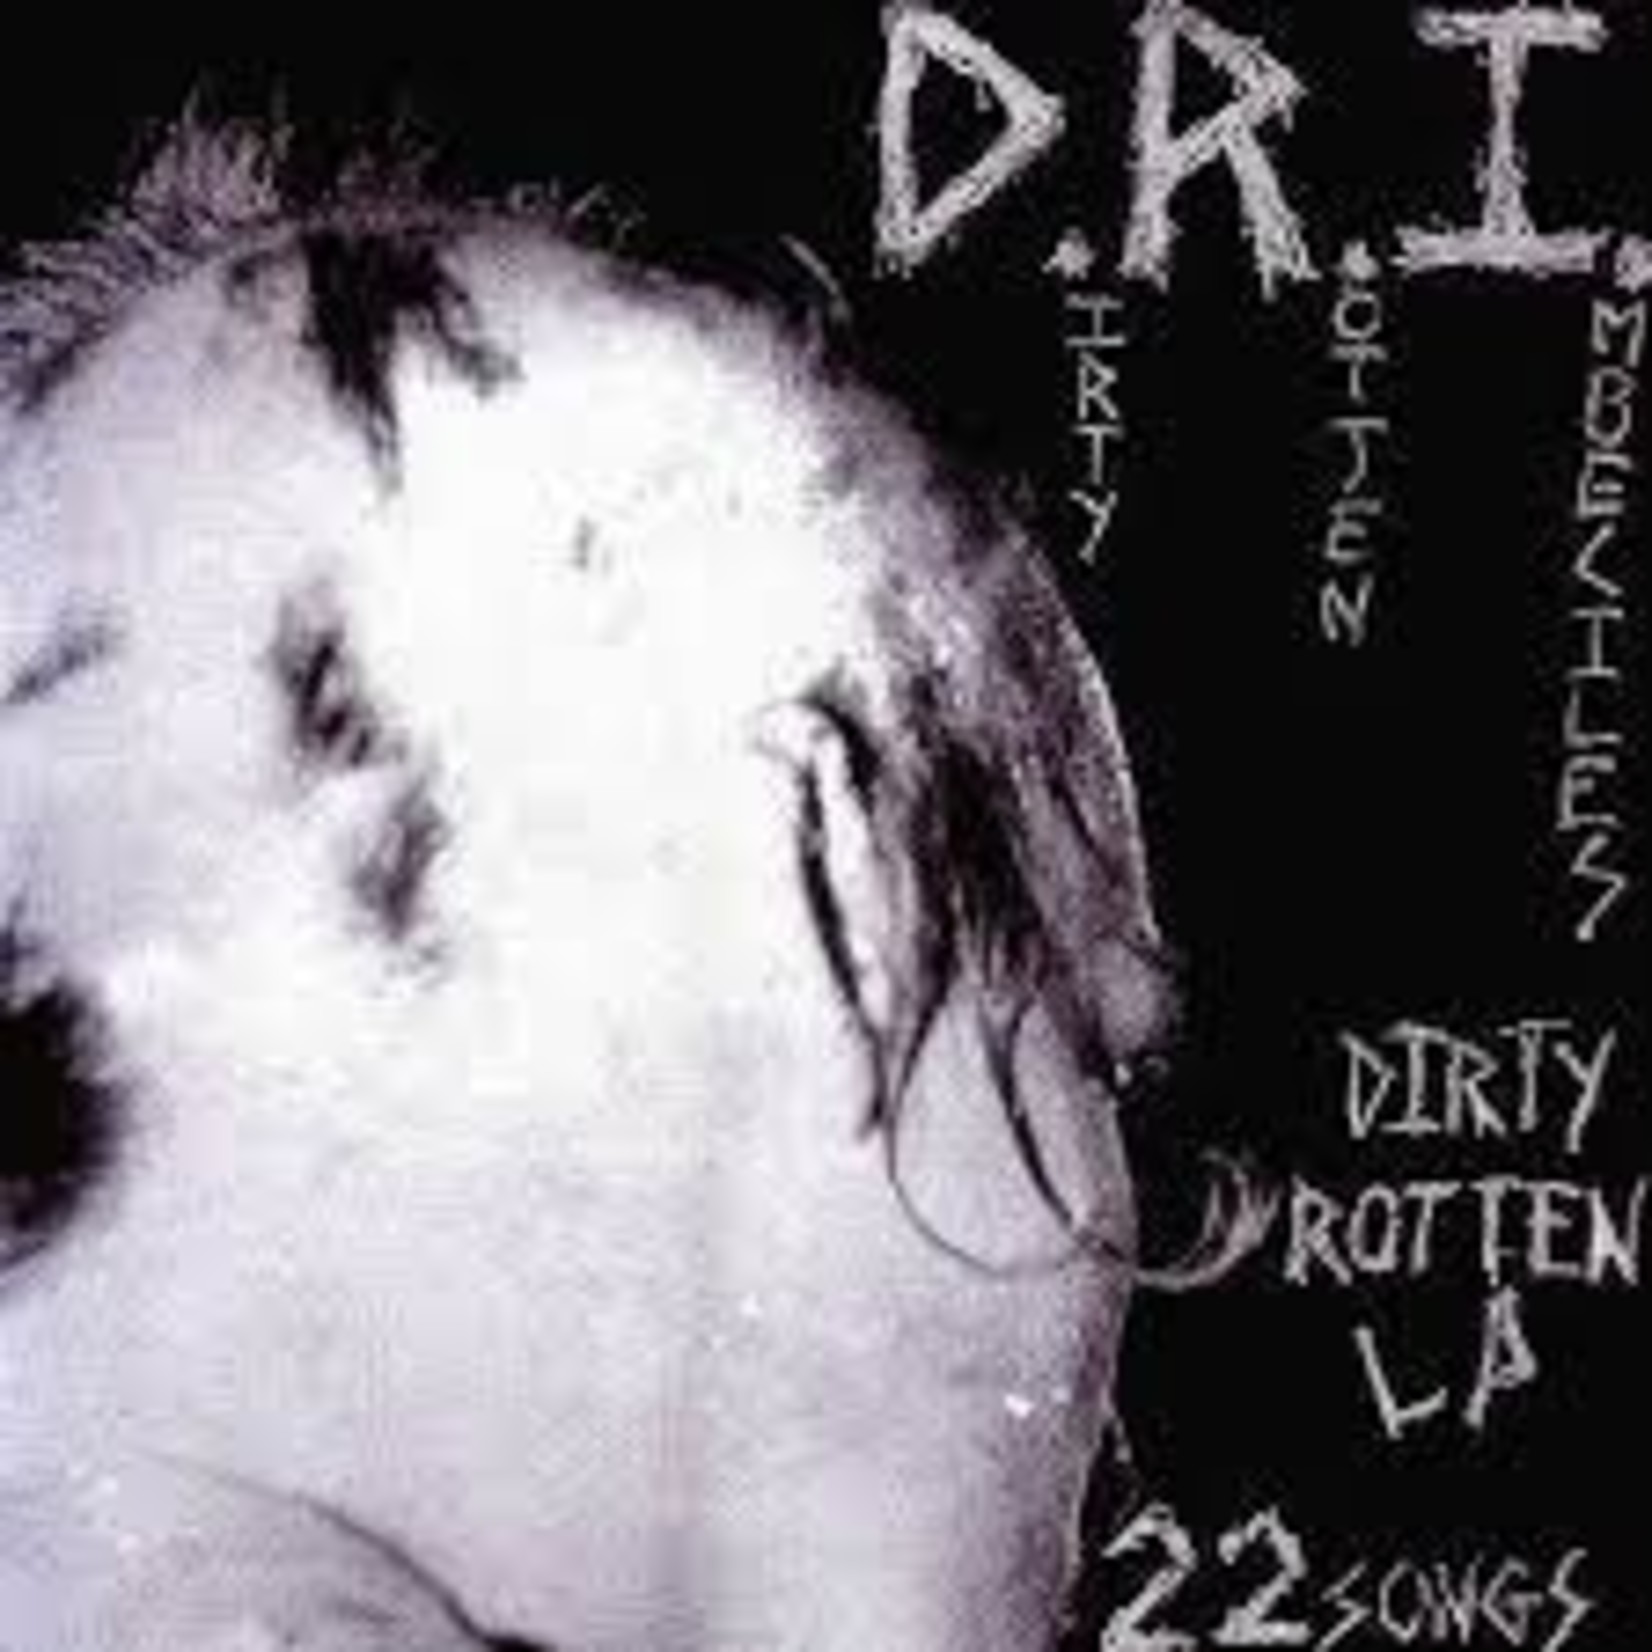 D.R.I - dirty rotten 22 songs LP